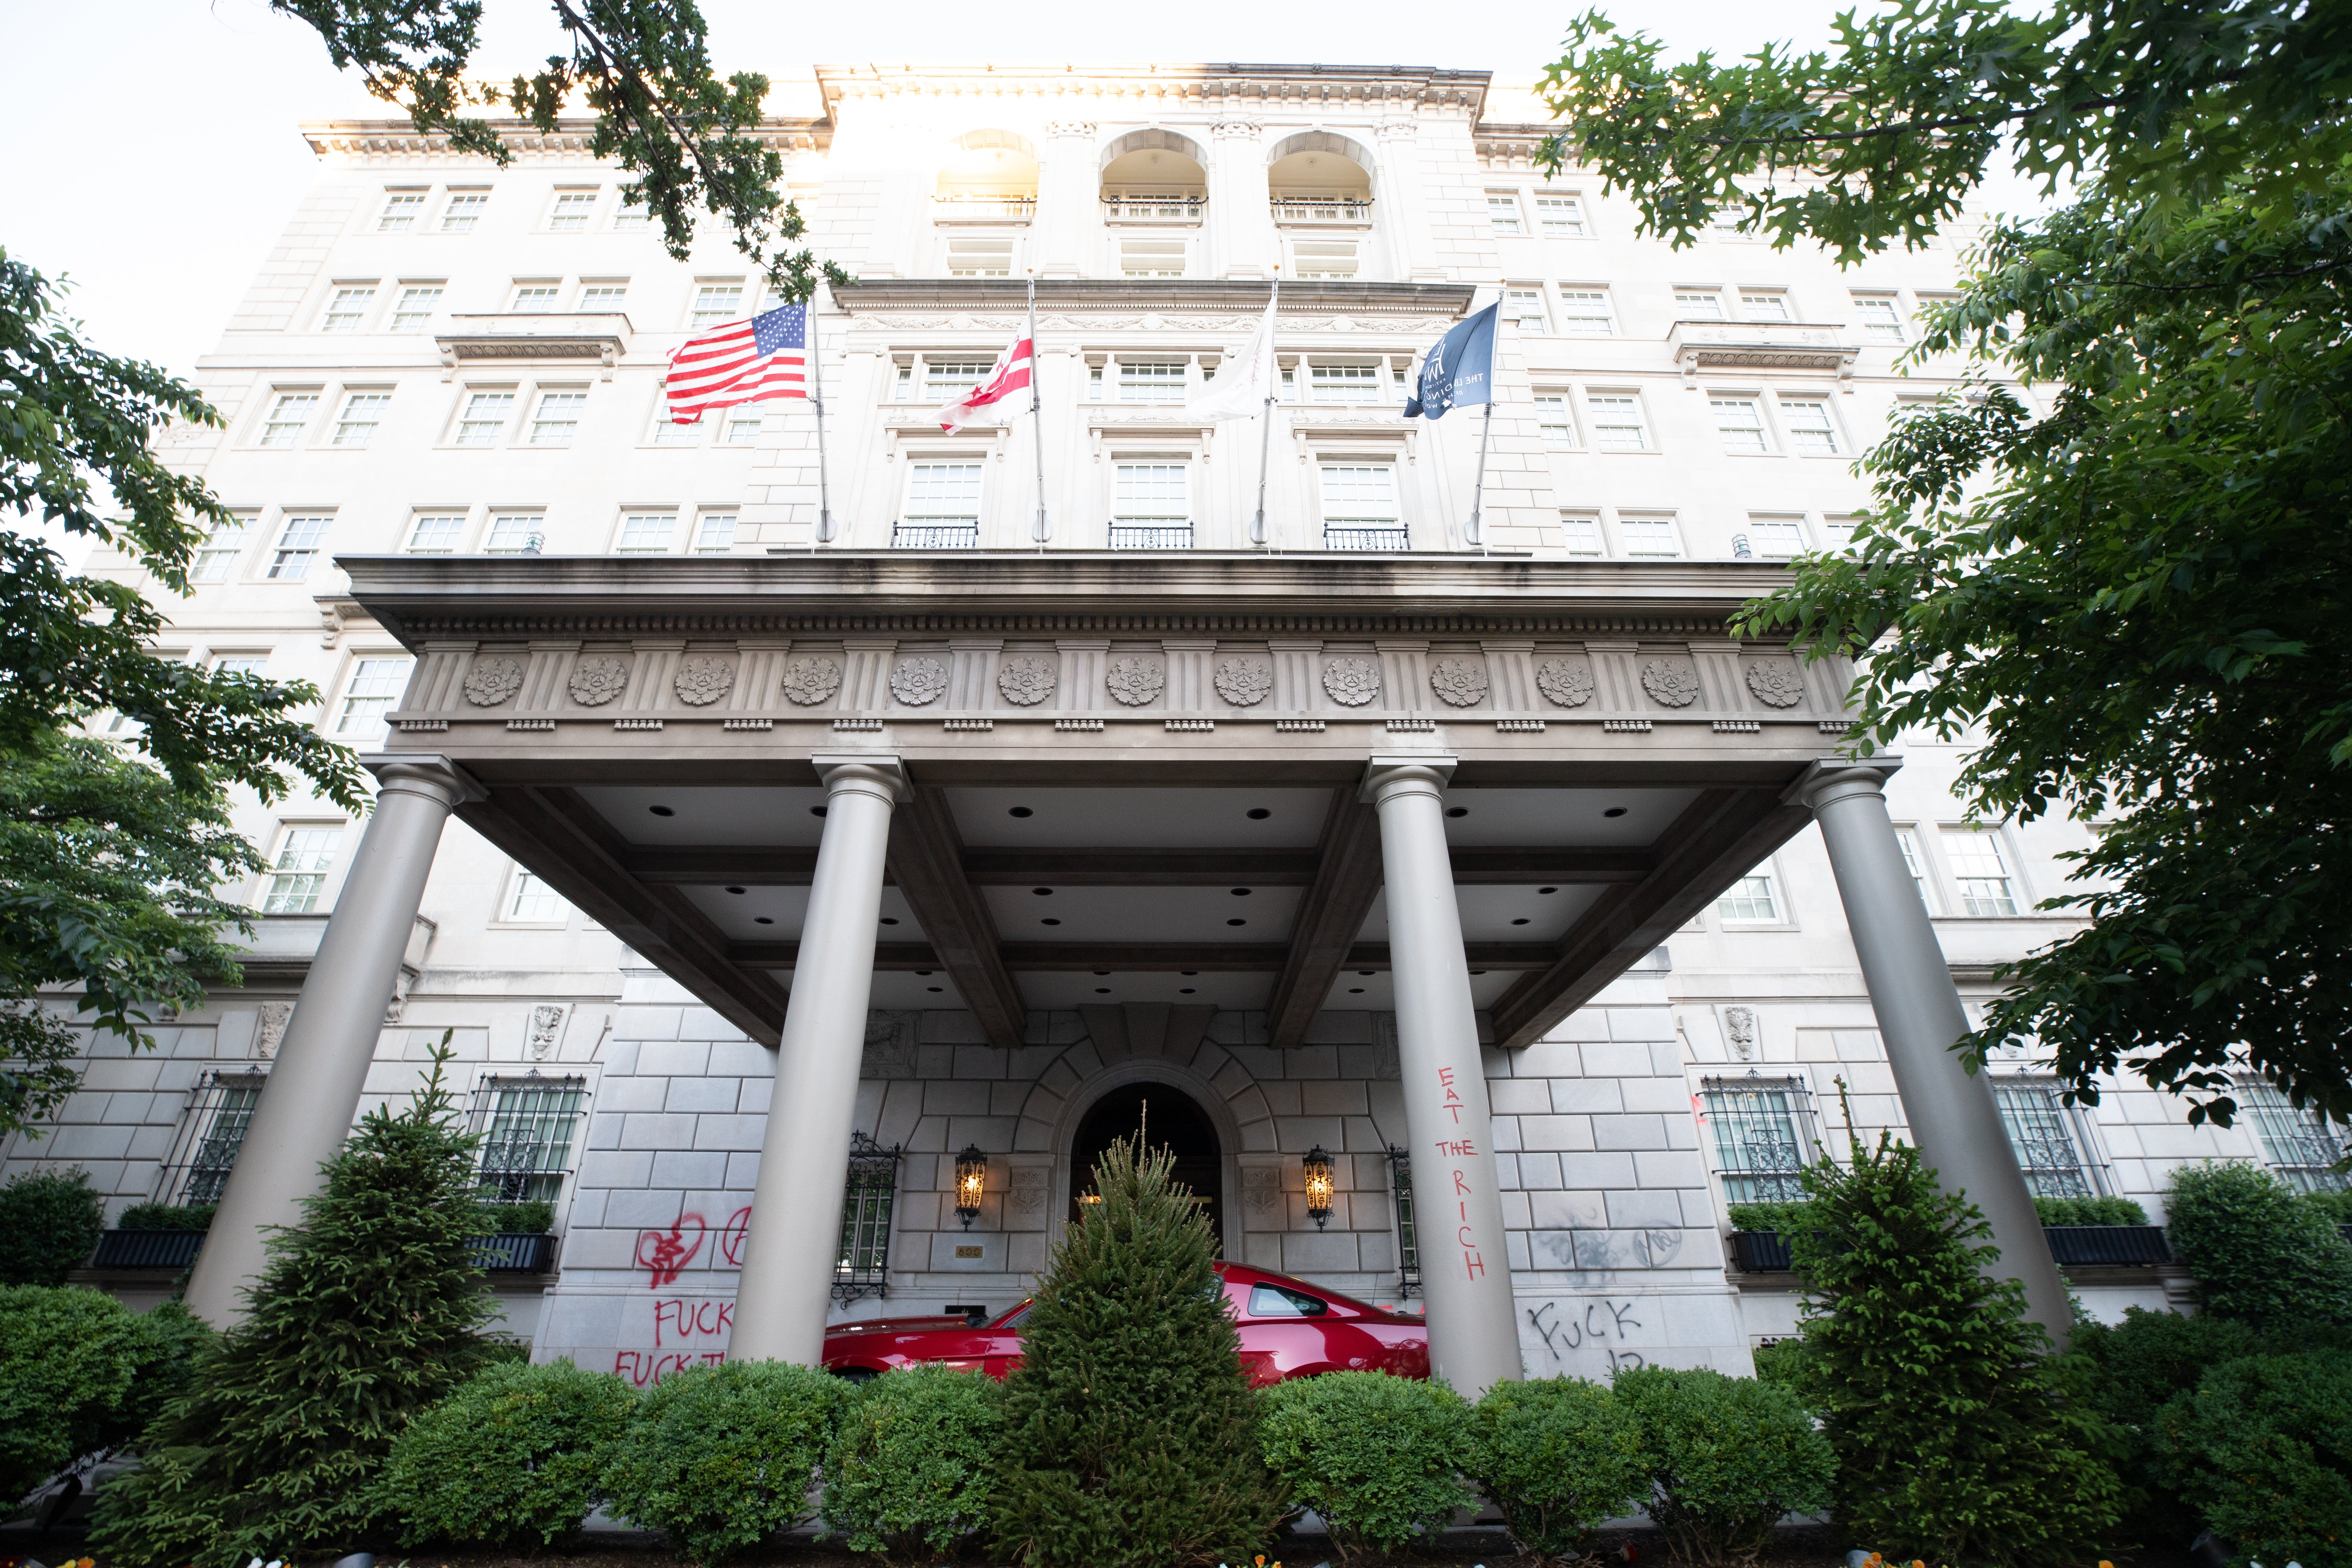 The Hay-Adams Hotel. (Photo: Kaylee C. Greenlee for The Daily Caller)